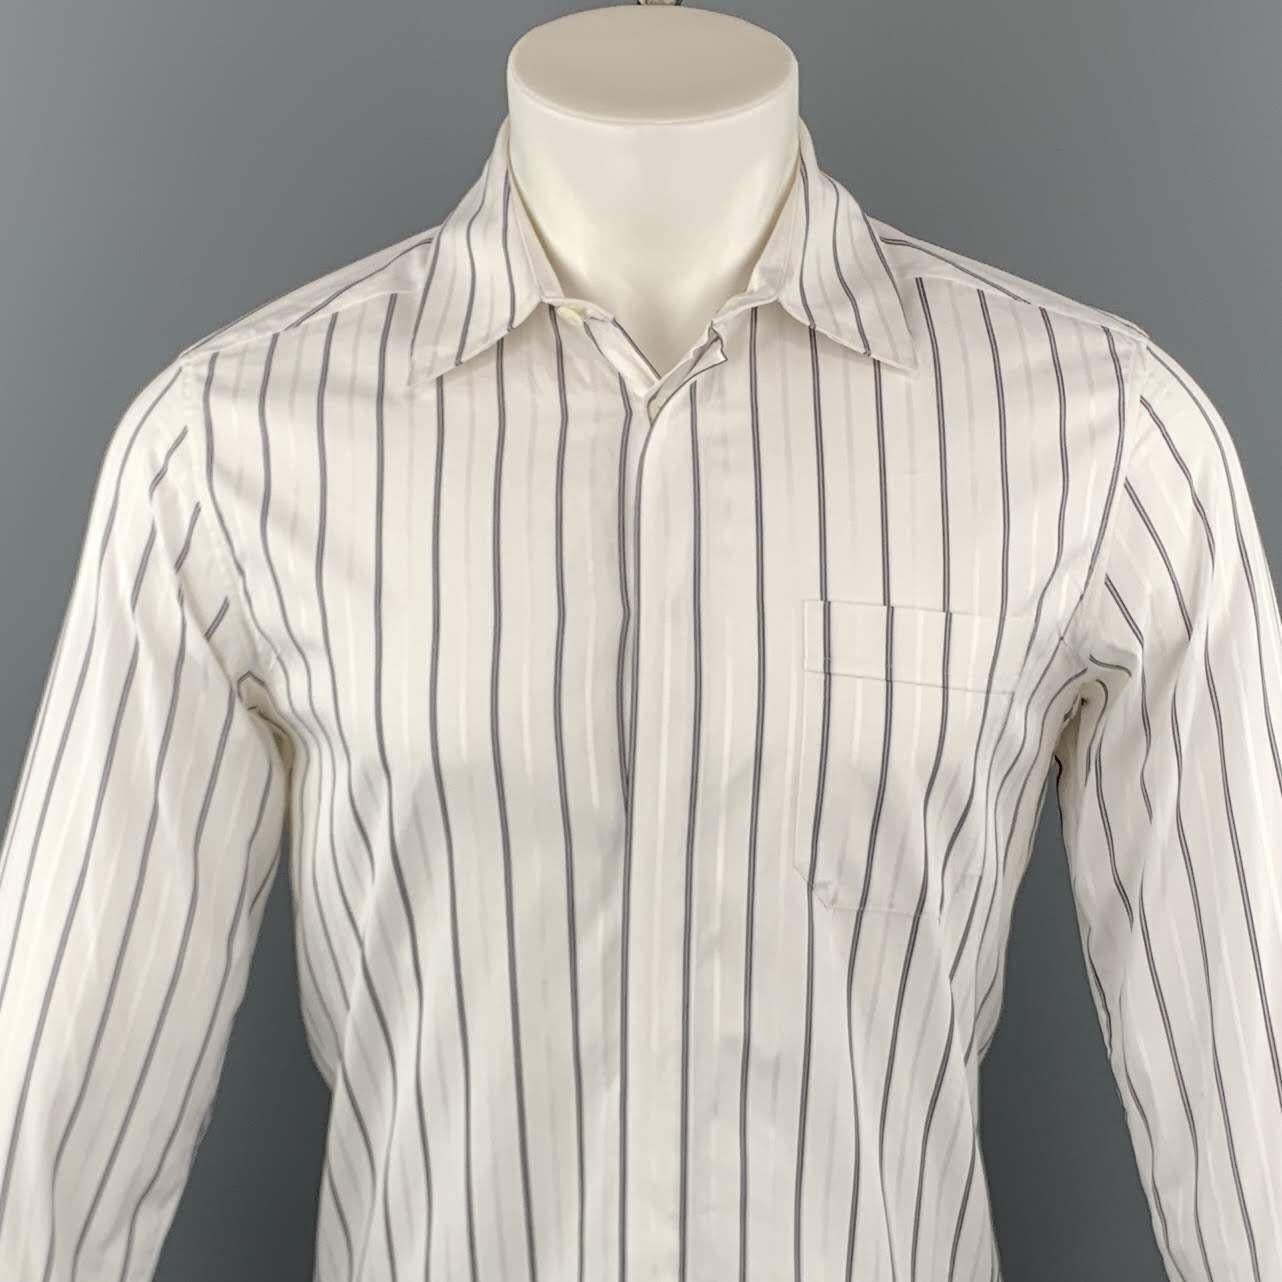 KRIS VAN ASSCHE long sleeve shirt comes in a white and navy striped cotton featuring a button up style, hidden button closure, spread collar, and a front patch pocket. Made in Italy.

Excellent Pre-Owned Condition.
Marked: IT